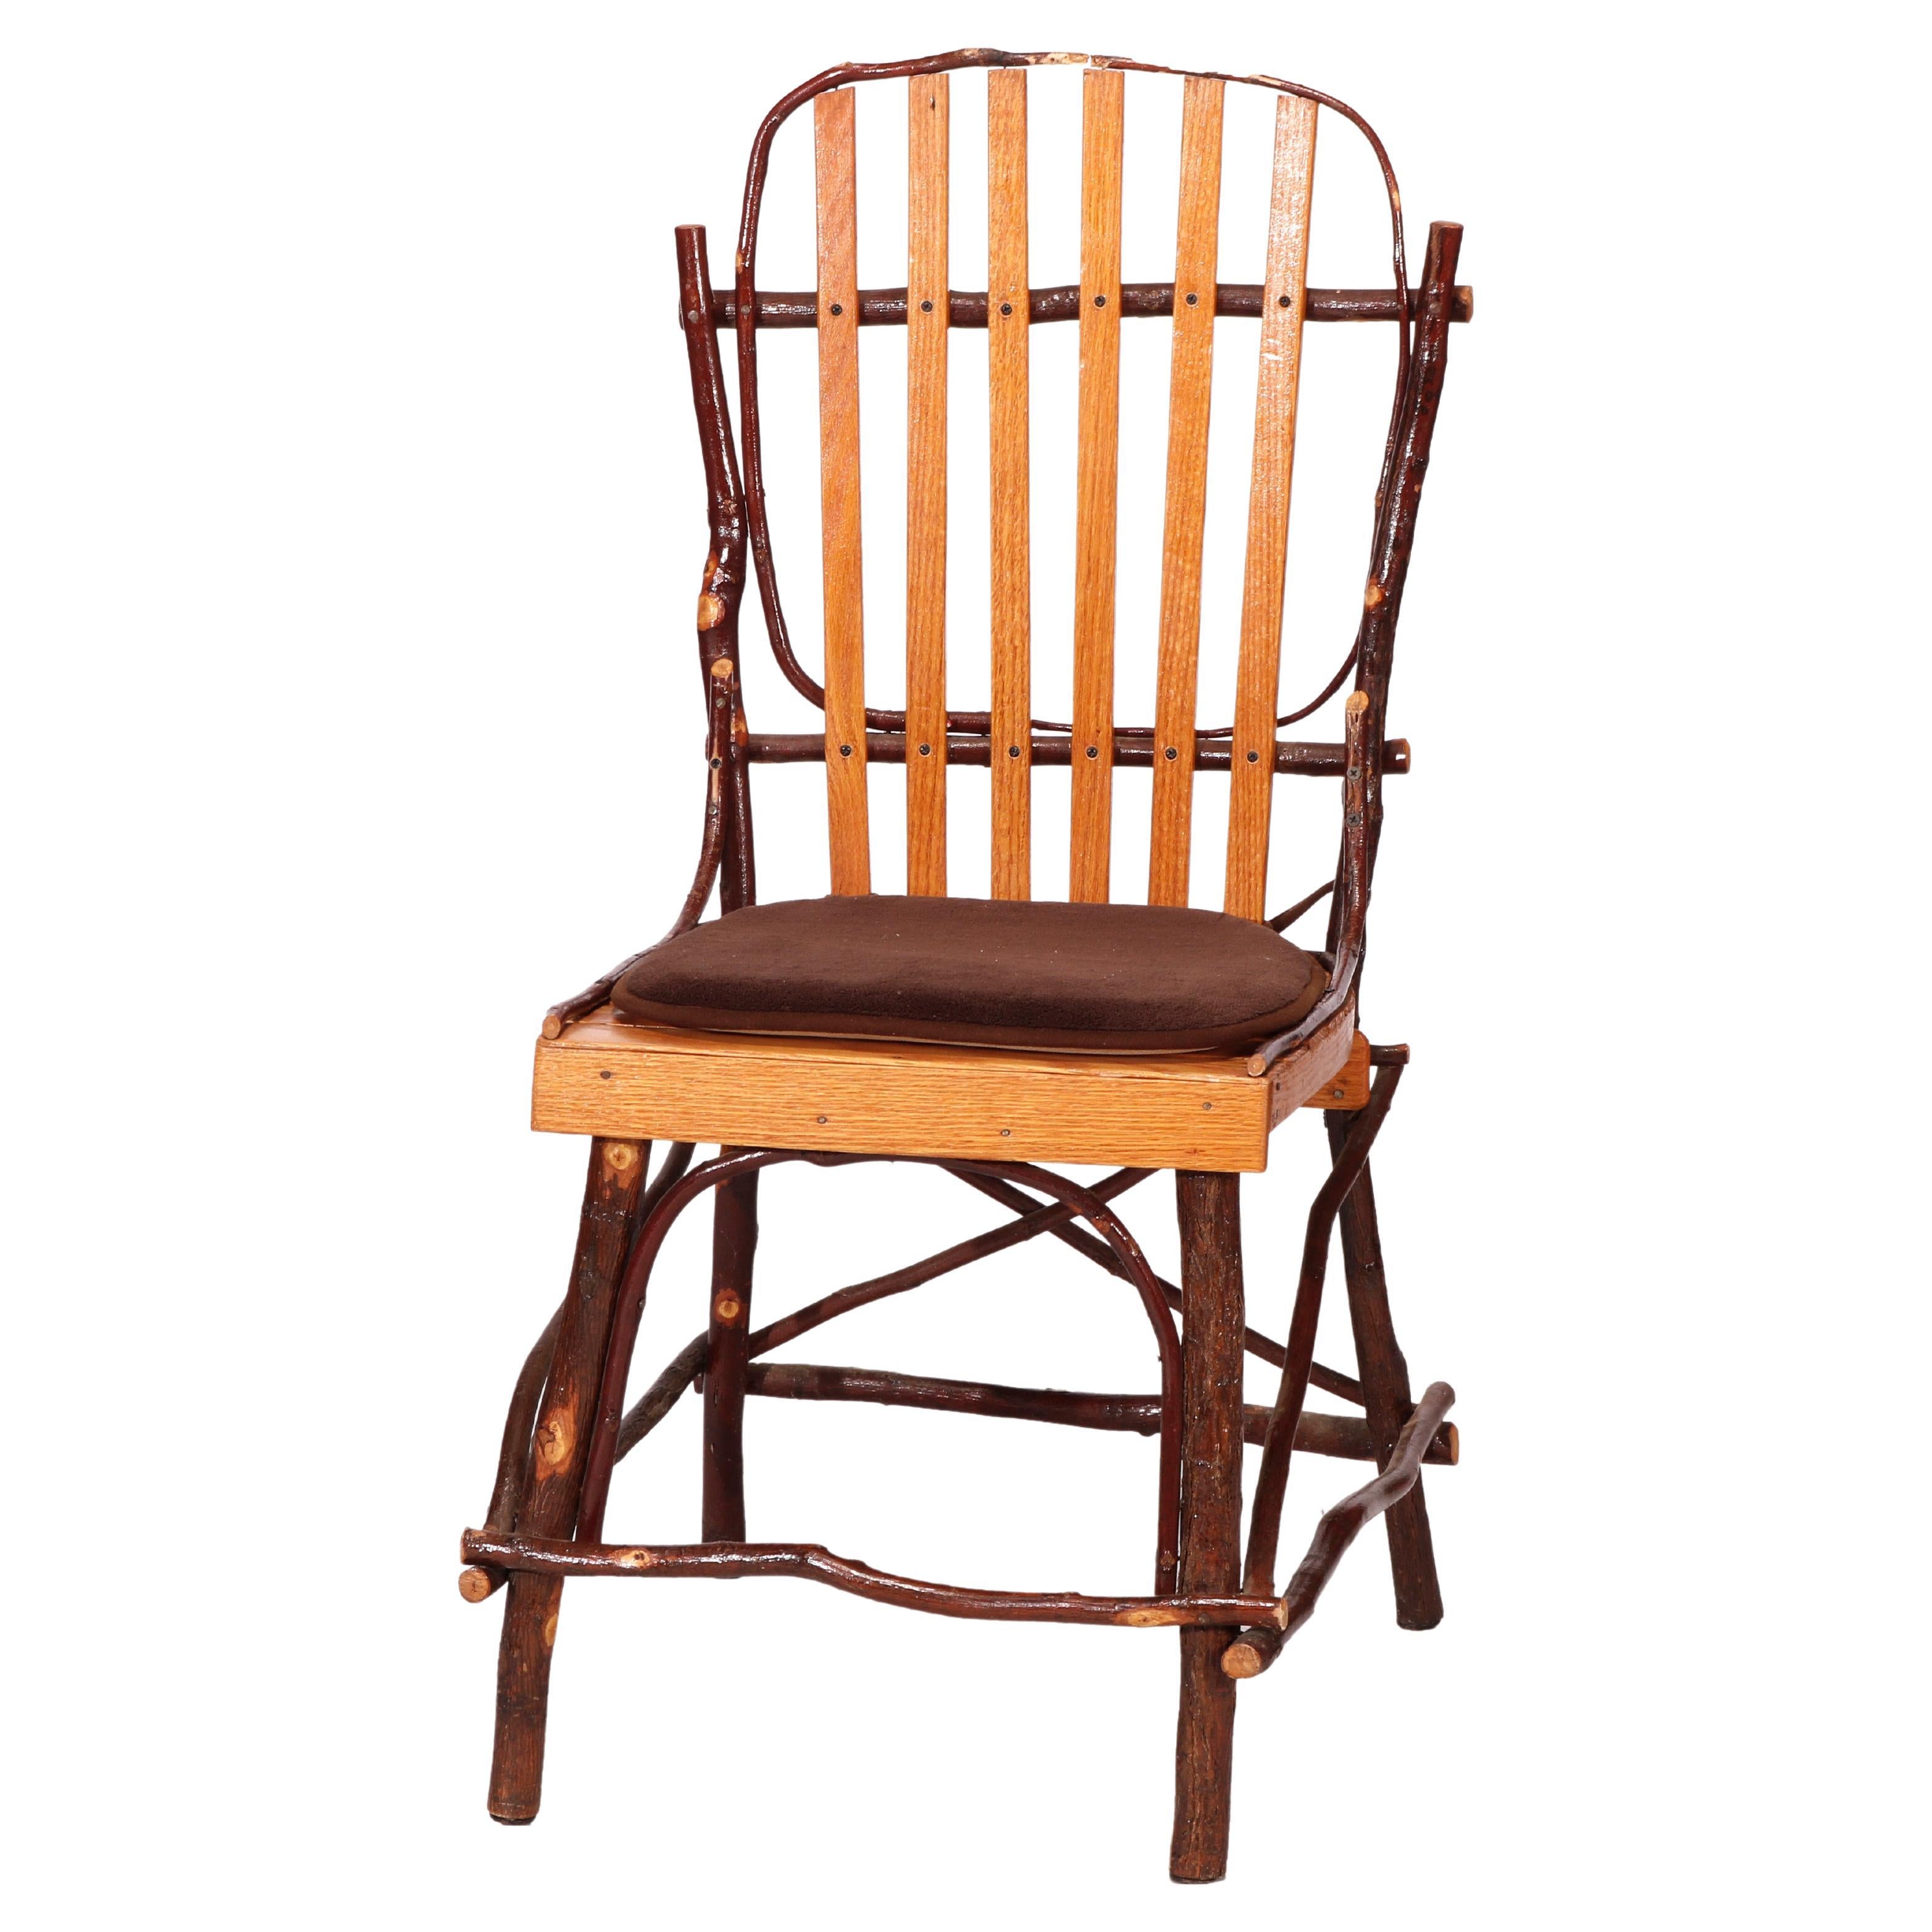 A set of four Old Hickory style dining side chairs offer stick form branch and slat construction, 20th century

Measures - 36''H x 18''W x 21.5''D.

Catalogue Note: Ask about DISCOUNTED DELIVERY RATES available to most regions within 1,500 miles of